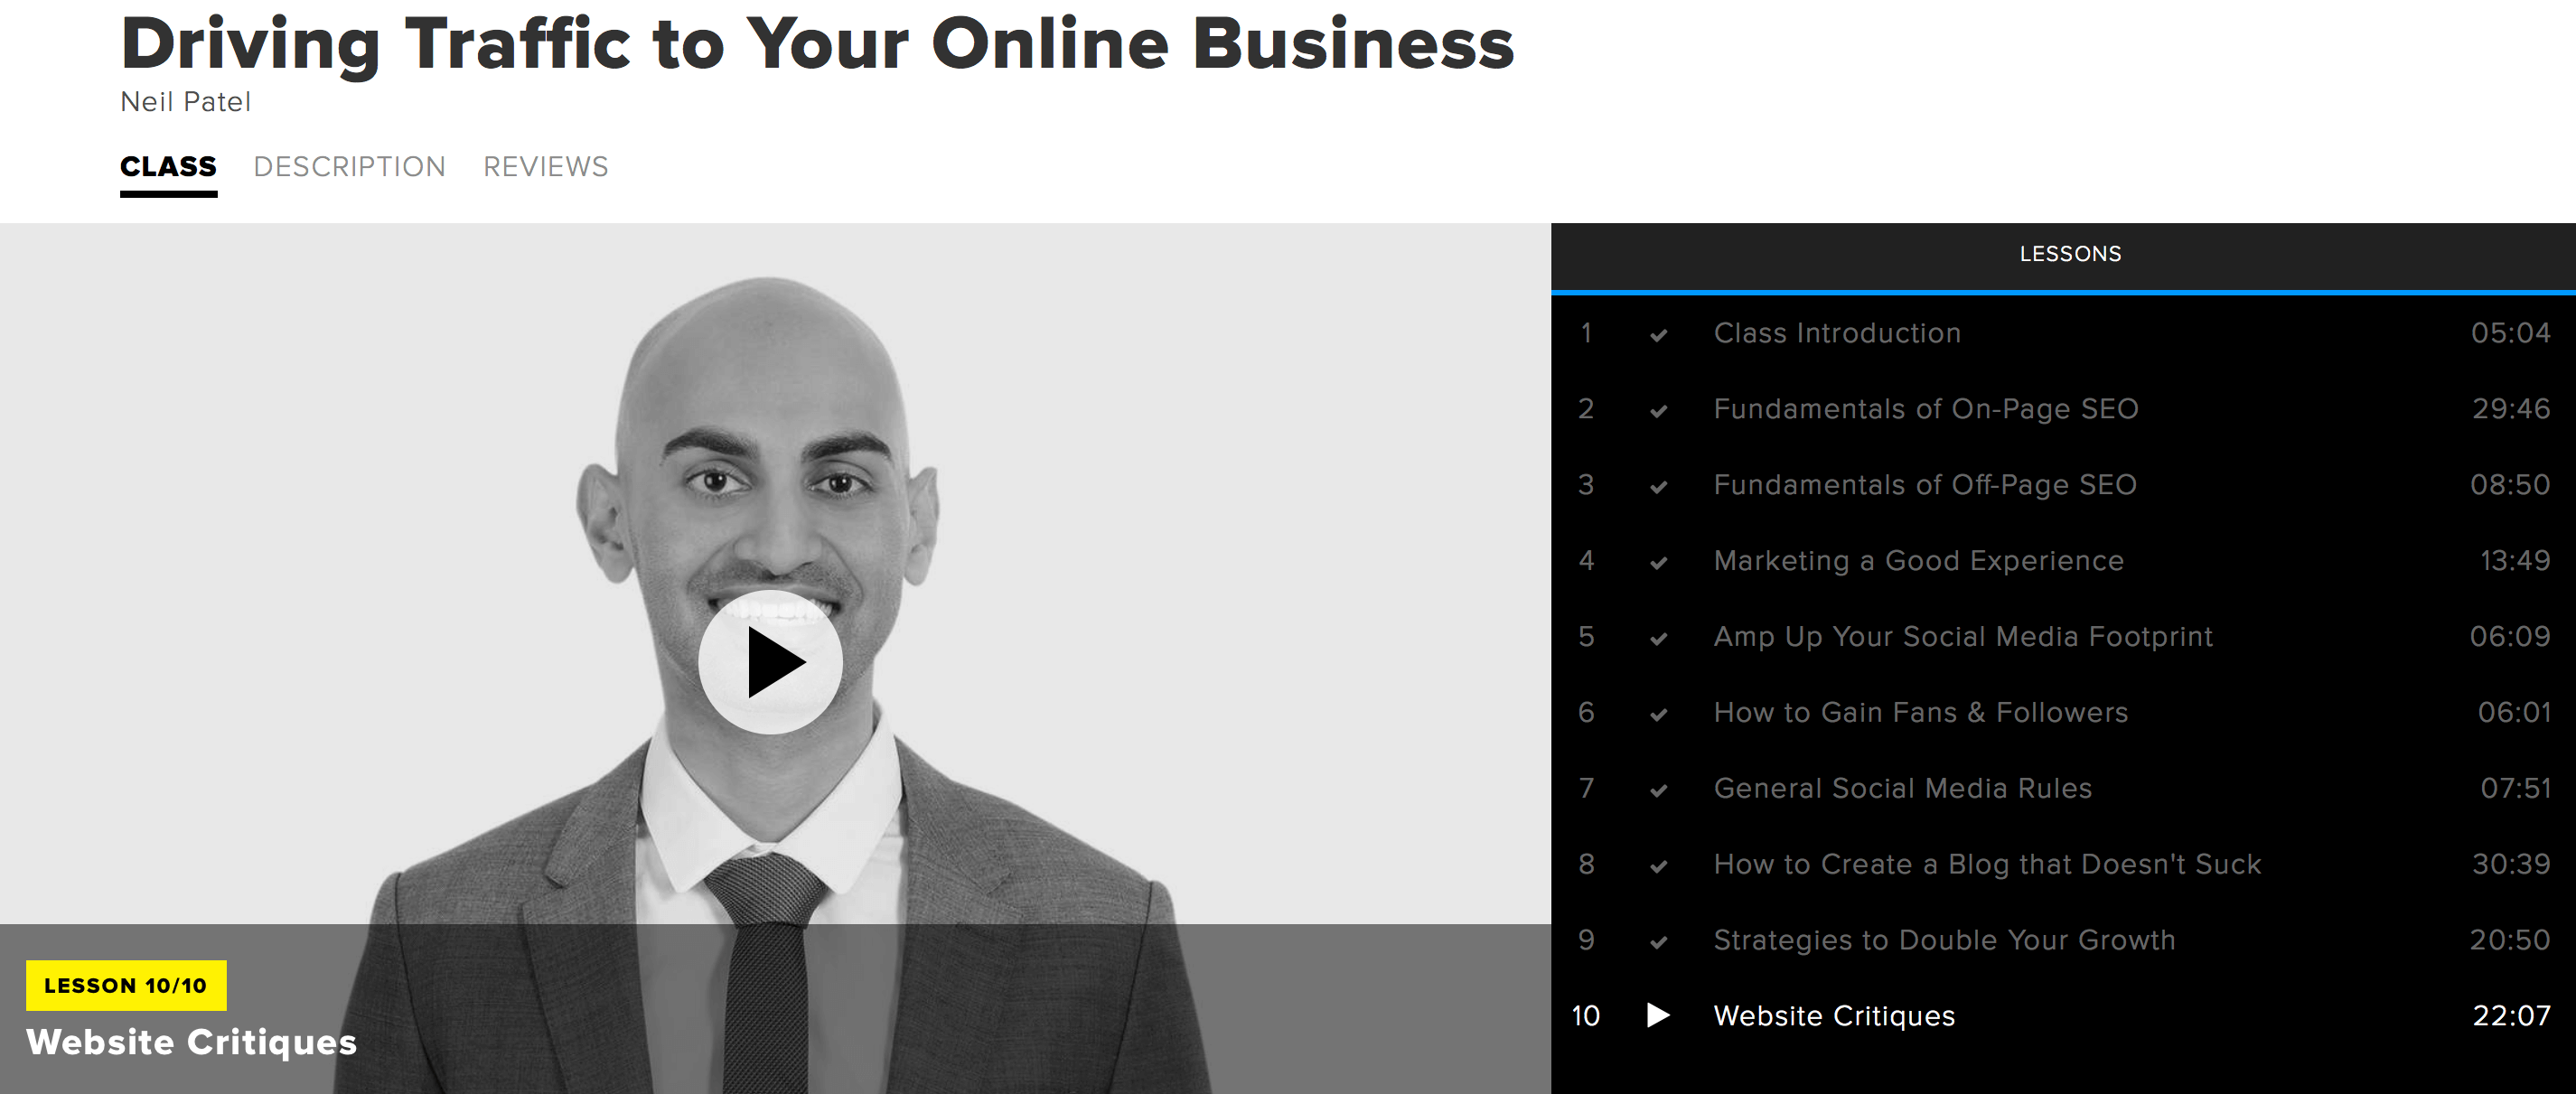 driving traffic to your online website neil patel creative live course review